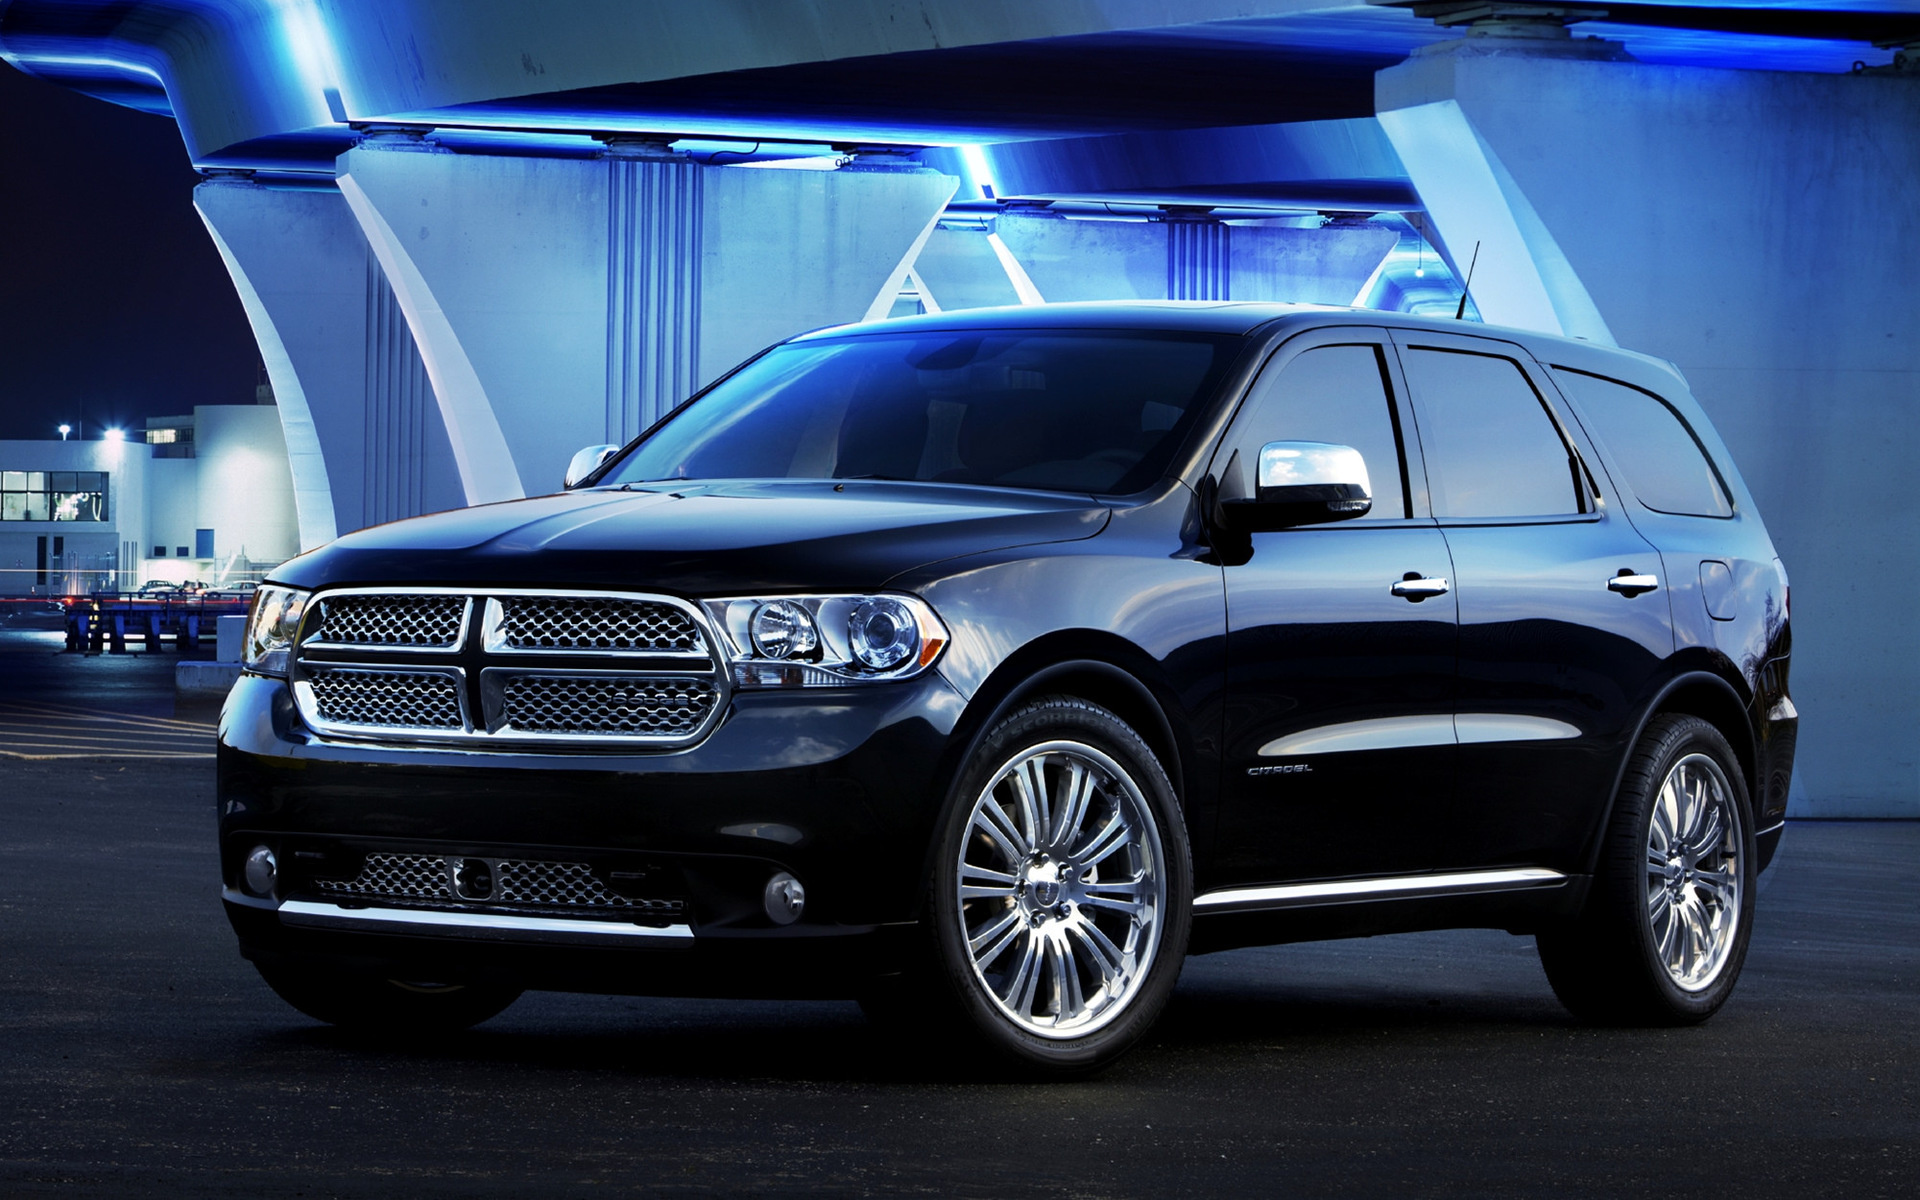 Dodge Durango, High-definition wallpapers, Complete your device, Express your style, 1920x1200 HD Desktop